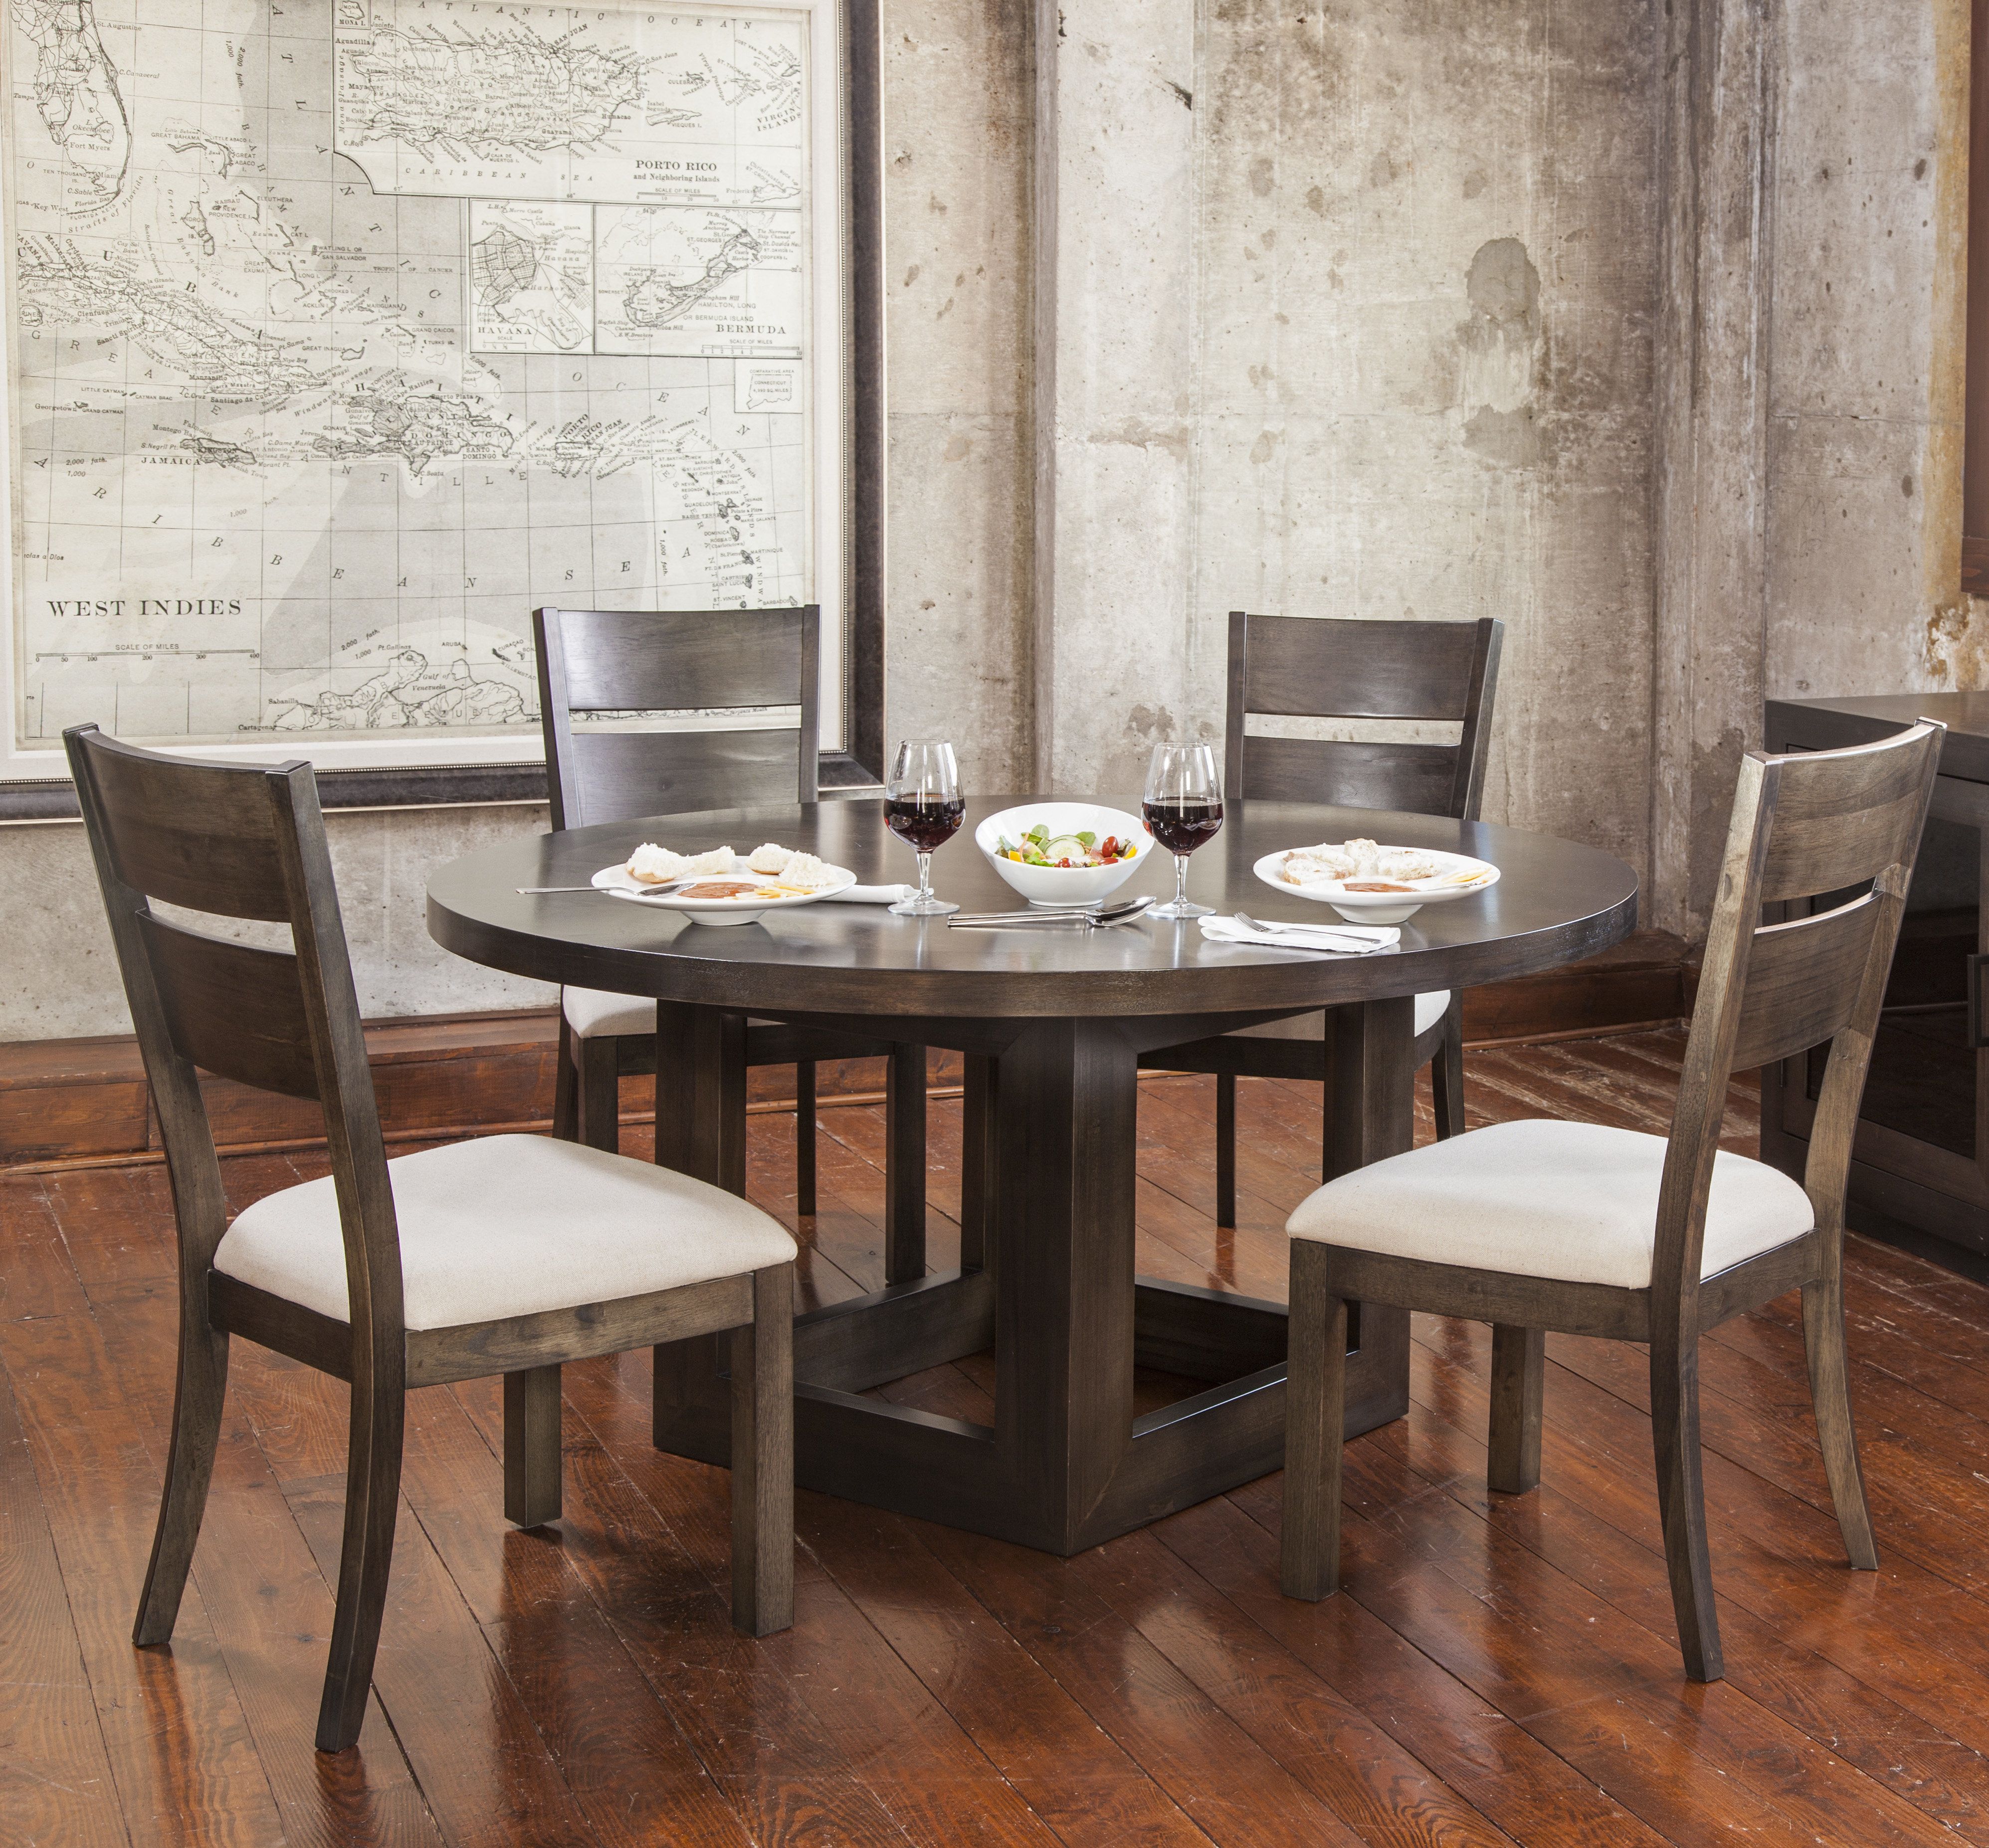 Gracie Oaks Hazelton 5 Piece Solid Wood Dining Set For Current Goodman 5 Piece Solid Wood Dining Sets (Set Of 5) (View 6 of 20)